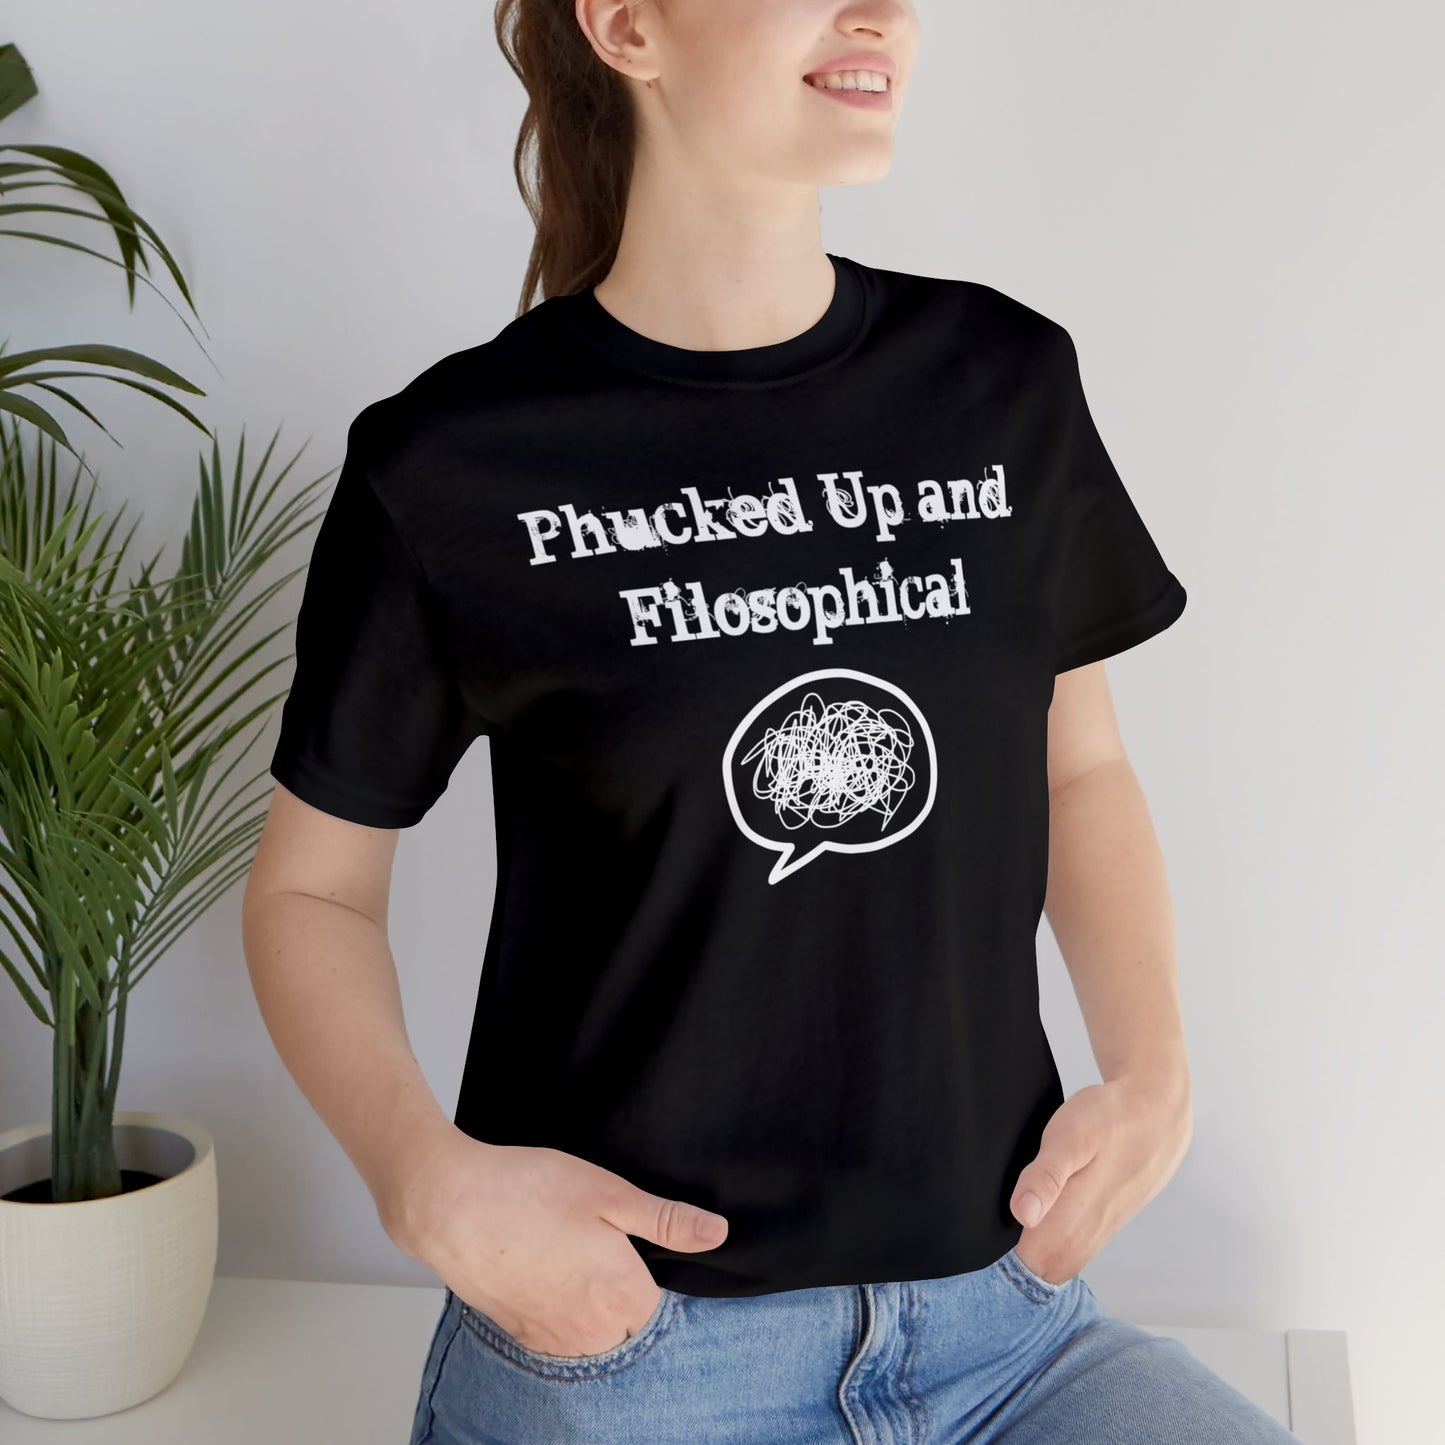 PhUaF Thought Scribble Tee